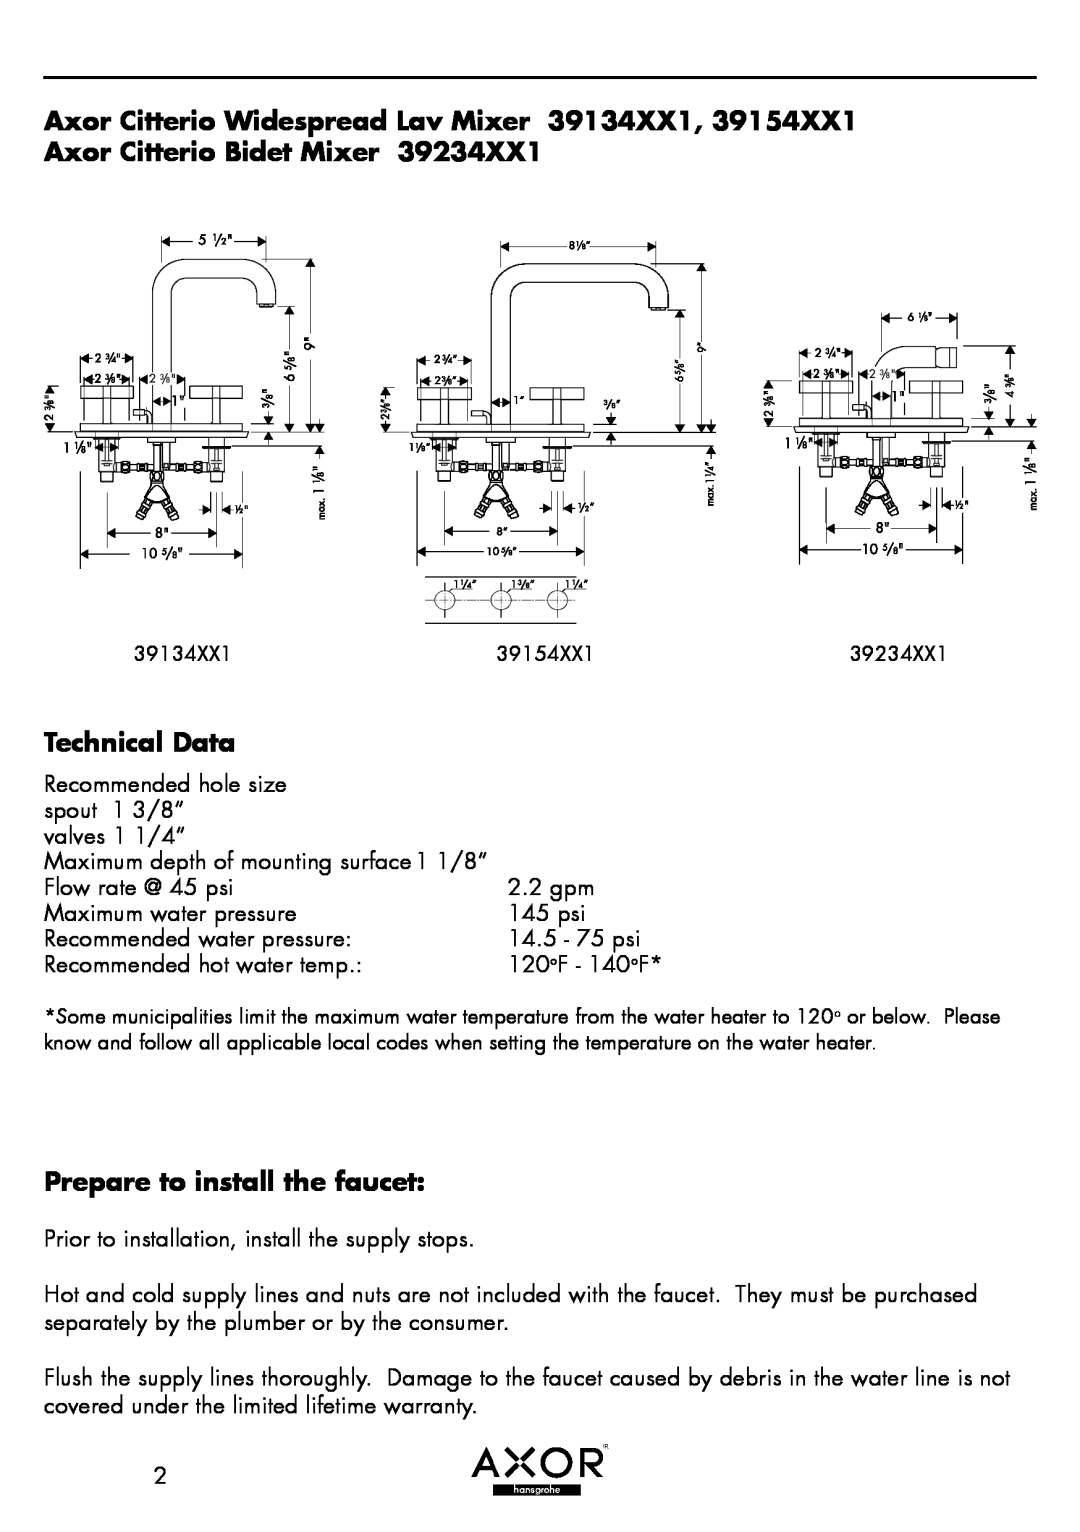 Axor 39234XX1, 39154XX1 installation instructions Technical Data, Prepare to install the faucet 